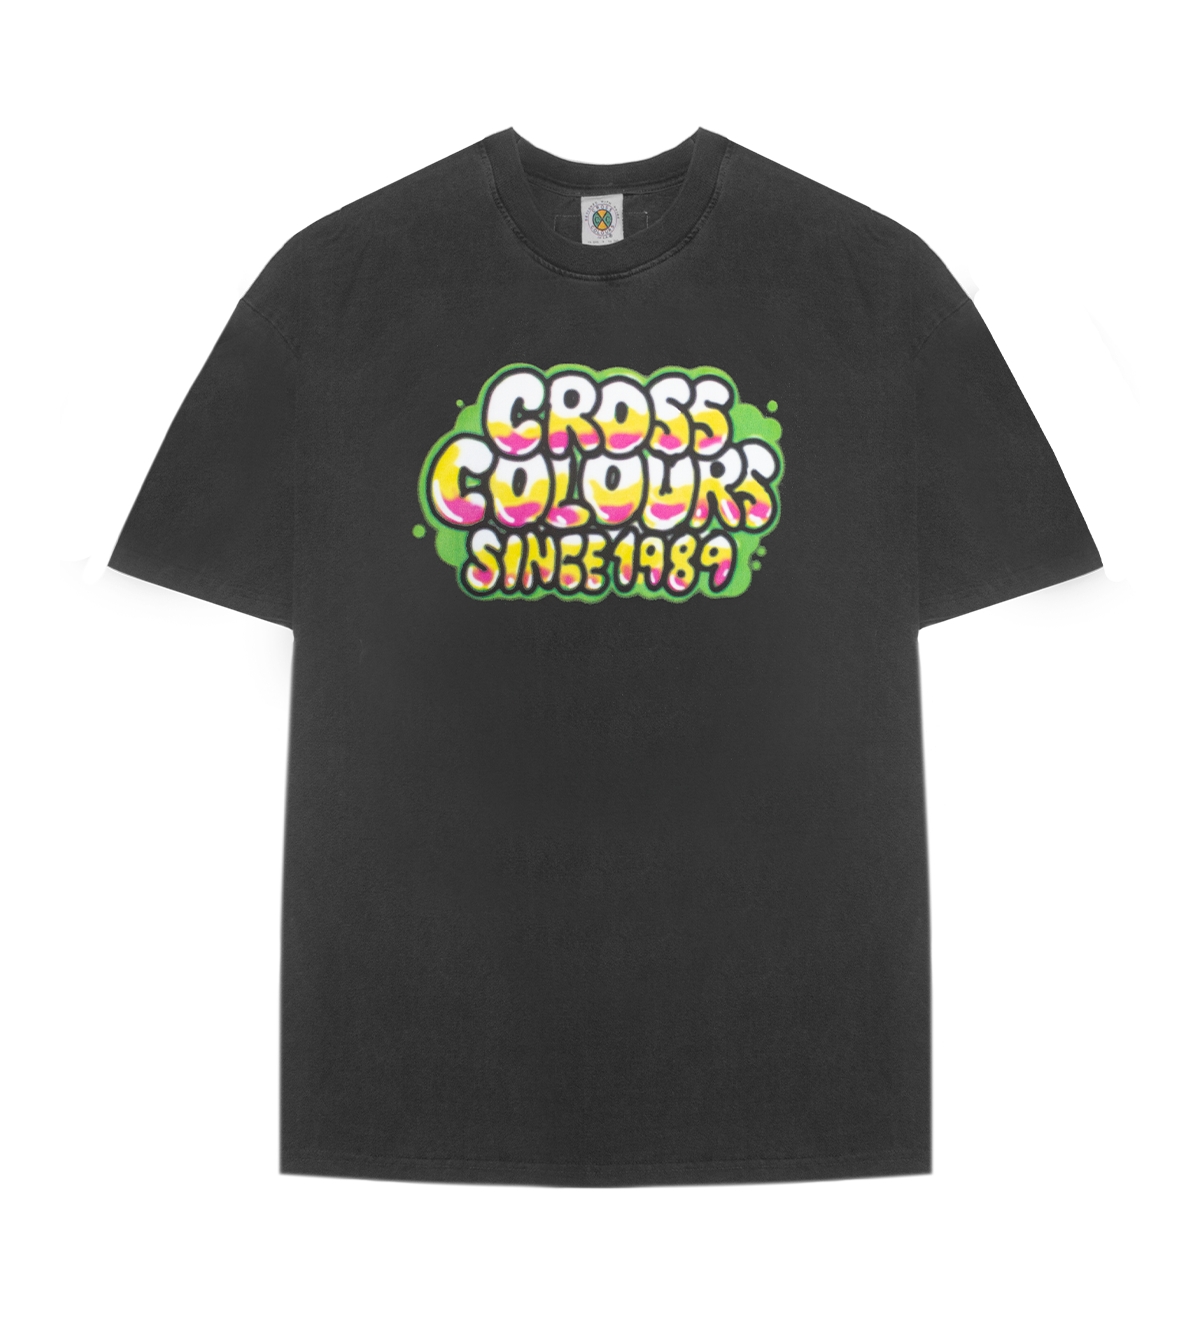 Since 1989 Airbrushed T-Shirt - Black